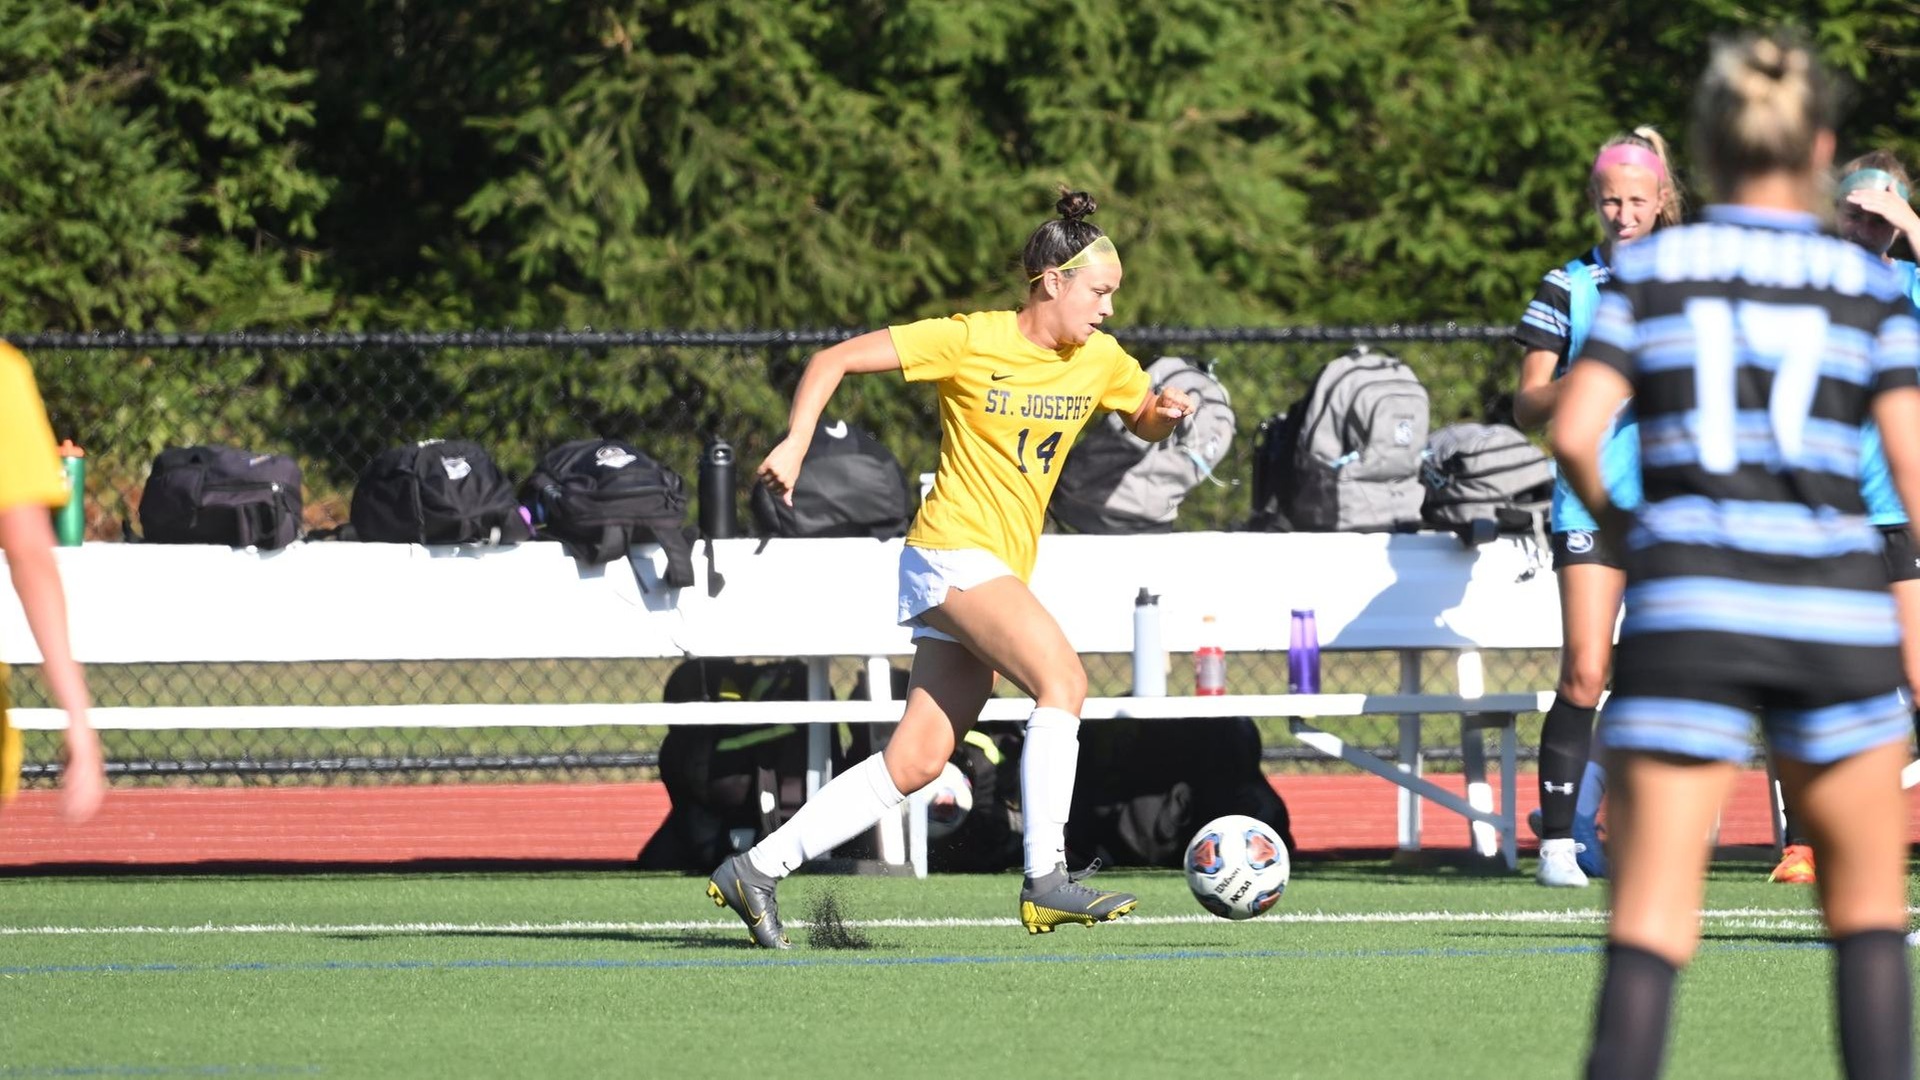 Strong Second Half Lifts Women's Soccer to 5-2 Win Over SJBK